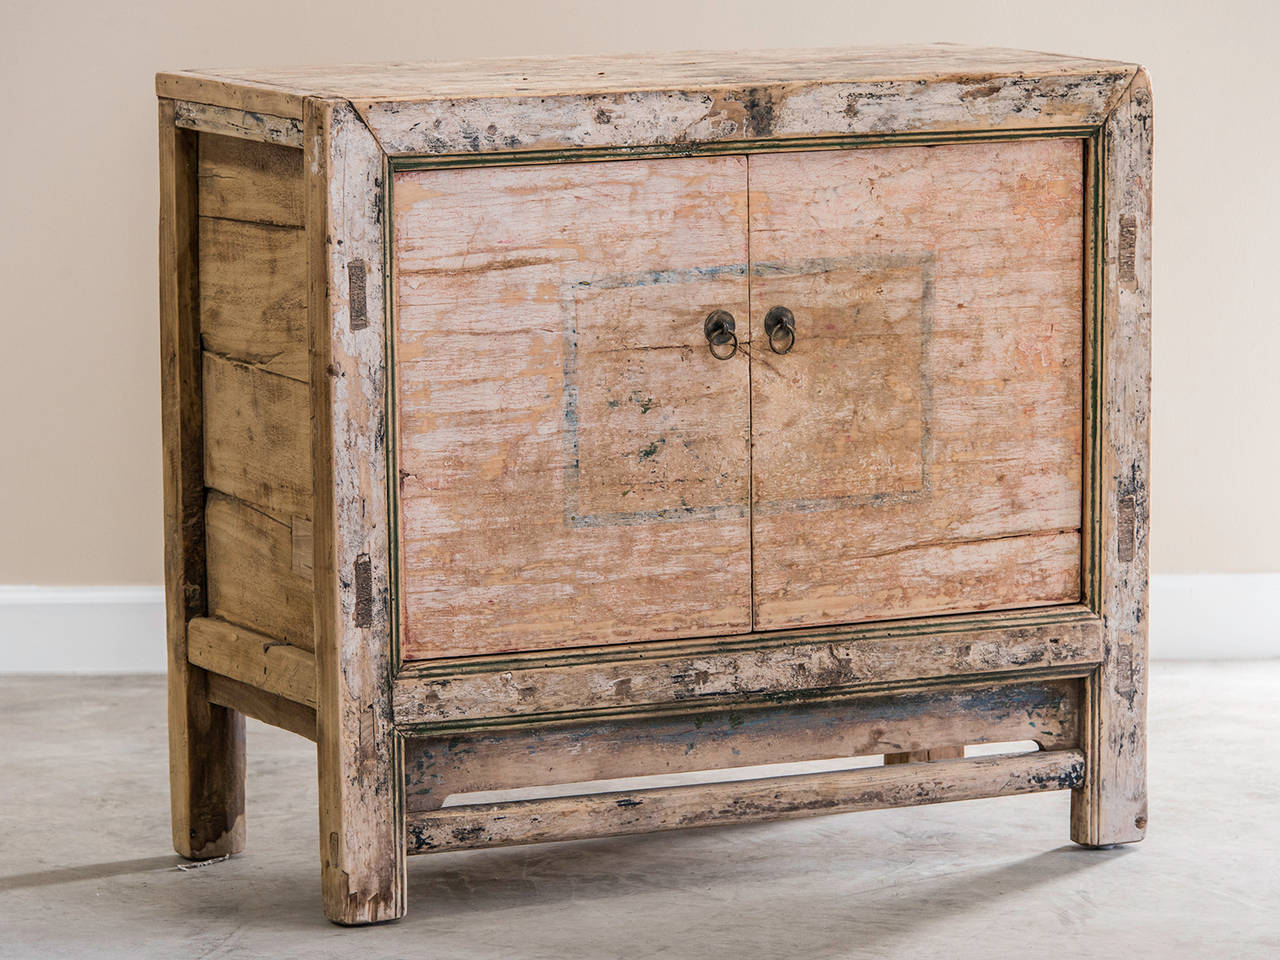 This charming cabinet has a pair of cabinet doors recessed into a framed opening with the entire exterior retaining traces of the original painted finish. Always built to sturdy specifications the mark of hand construction is quite evident